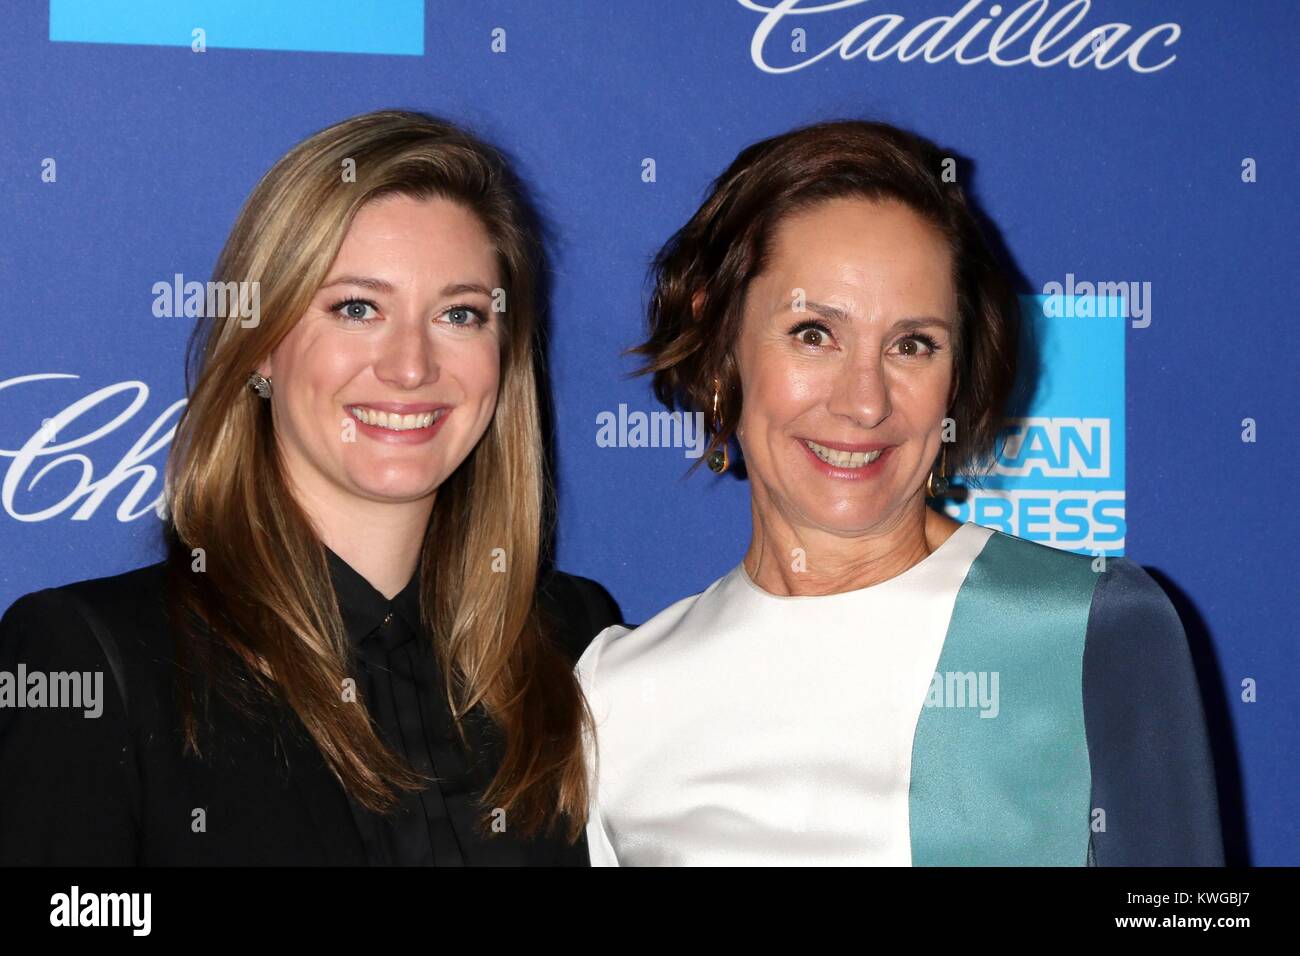 Palm Springs, CA. 2nd Jan, 2018. Zoe Perry, Laurie Metcalf at arrivals for 29th Annual Palm Springs International Film Festival Awards Gala, Palm Springs Convention Center, Palm Springs, CA January 2, 2018. Credit: Priscilla Grant/Everett Collection/Alamy Live News Stock Photo